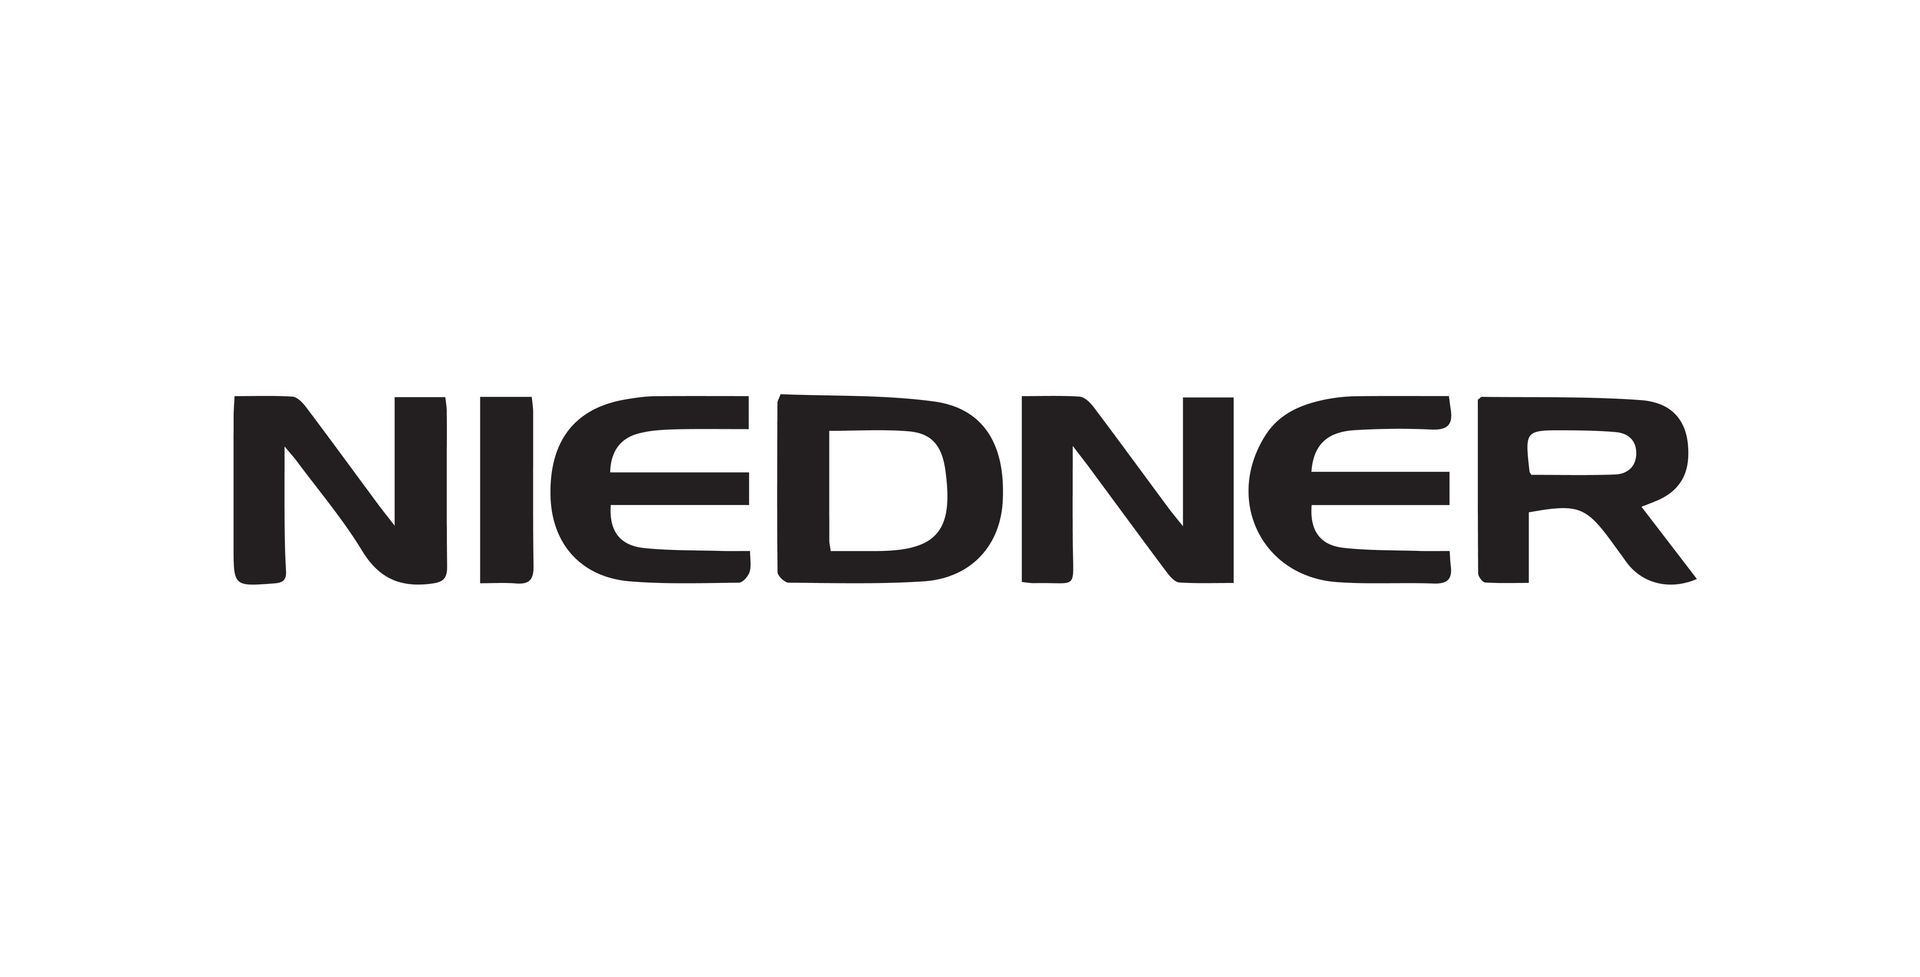 A black and white logo for niedner on a white background.